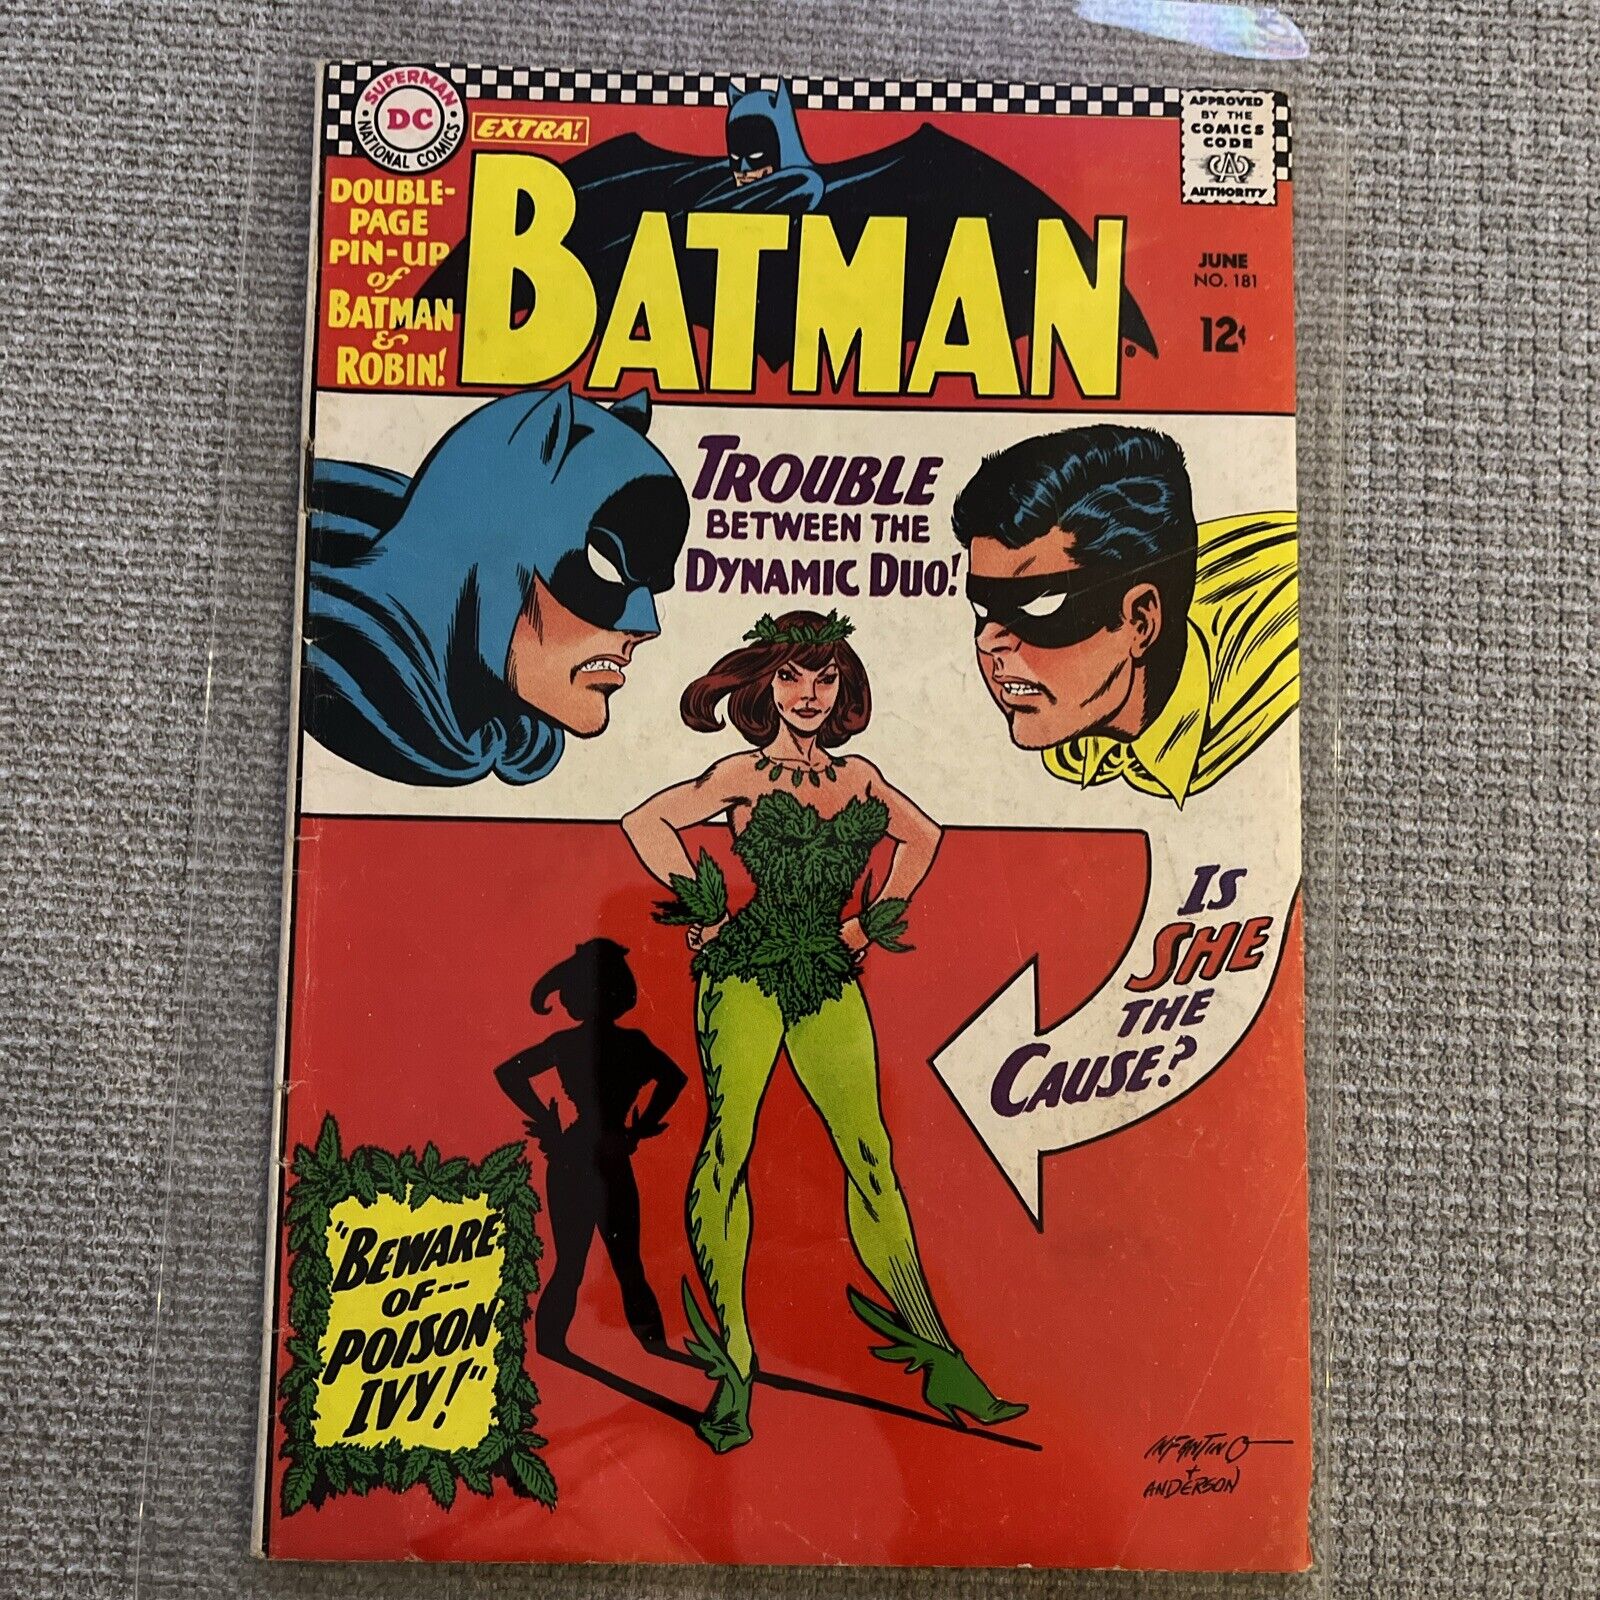 BATMAN #181 DC COMICS 1966 1ST APPEARANCE OF POISON IVY - PIN-UP Included 👀